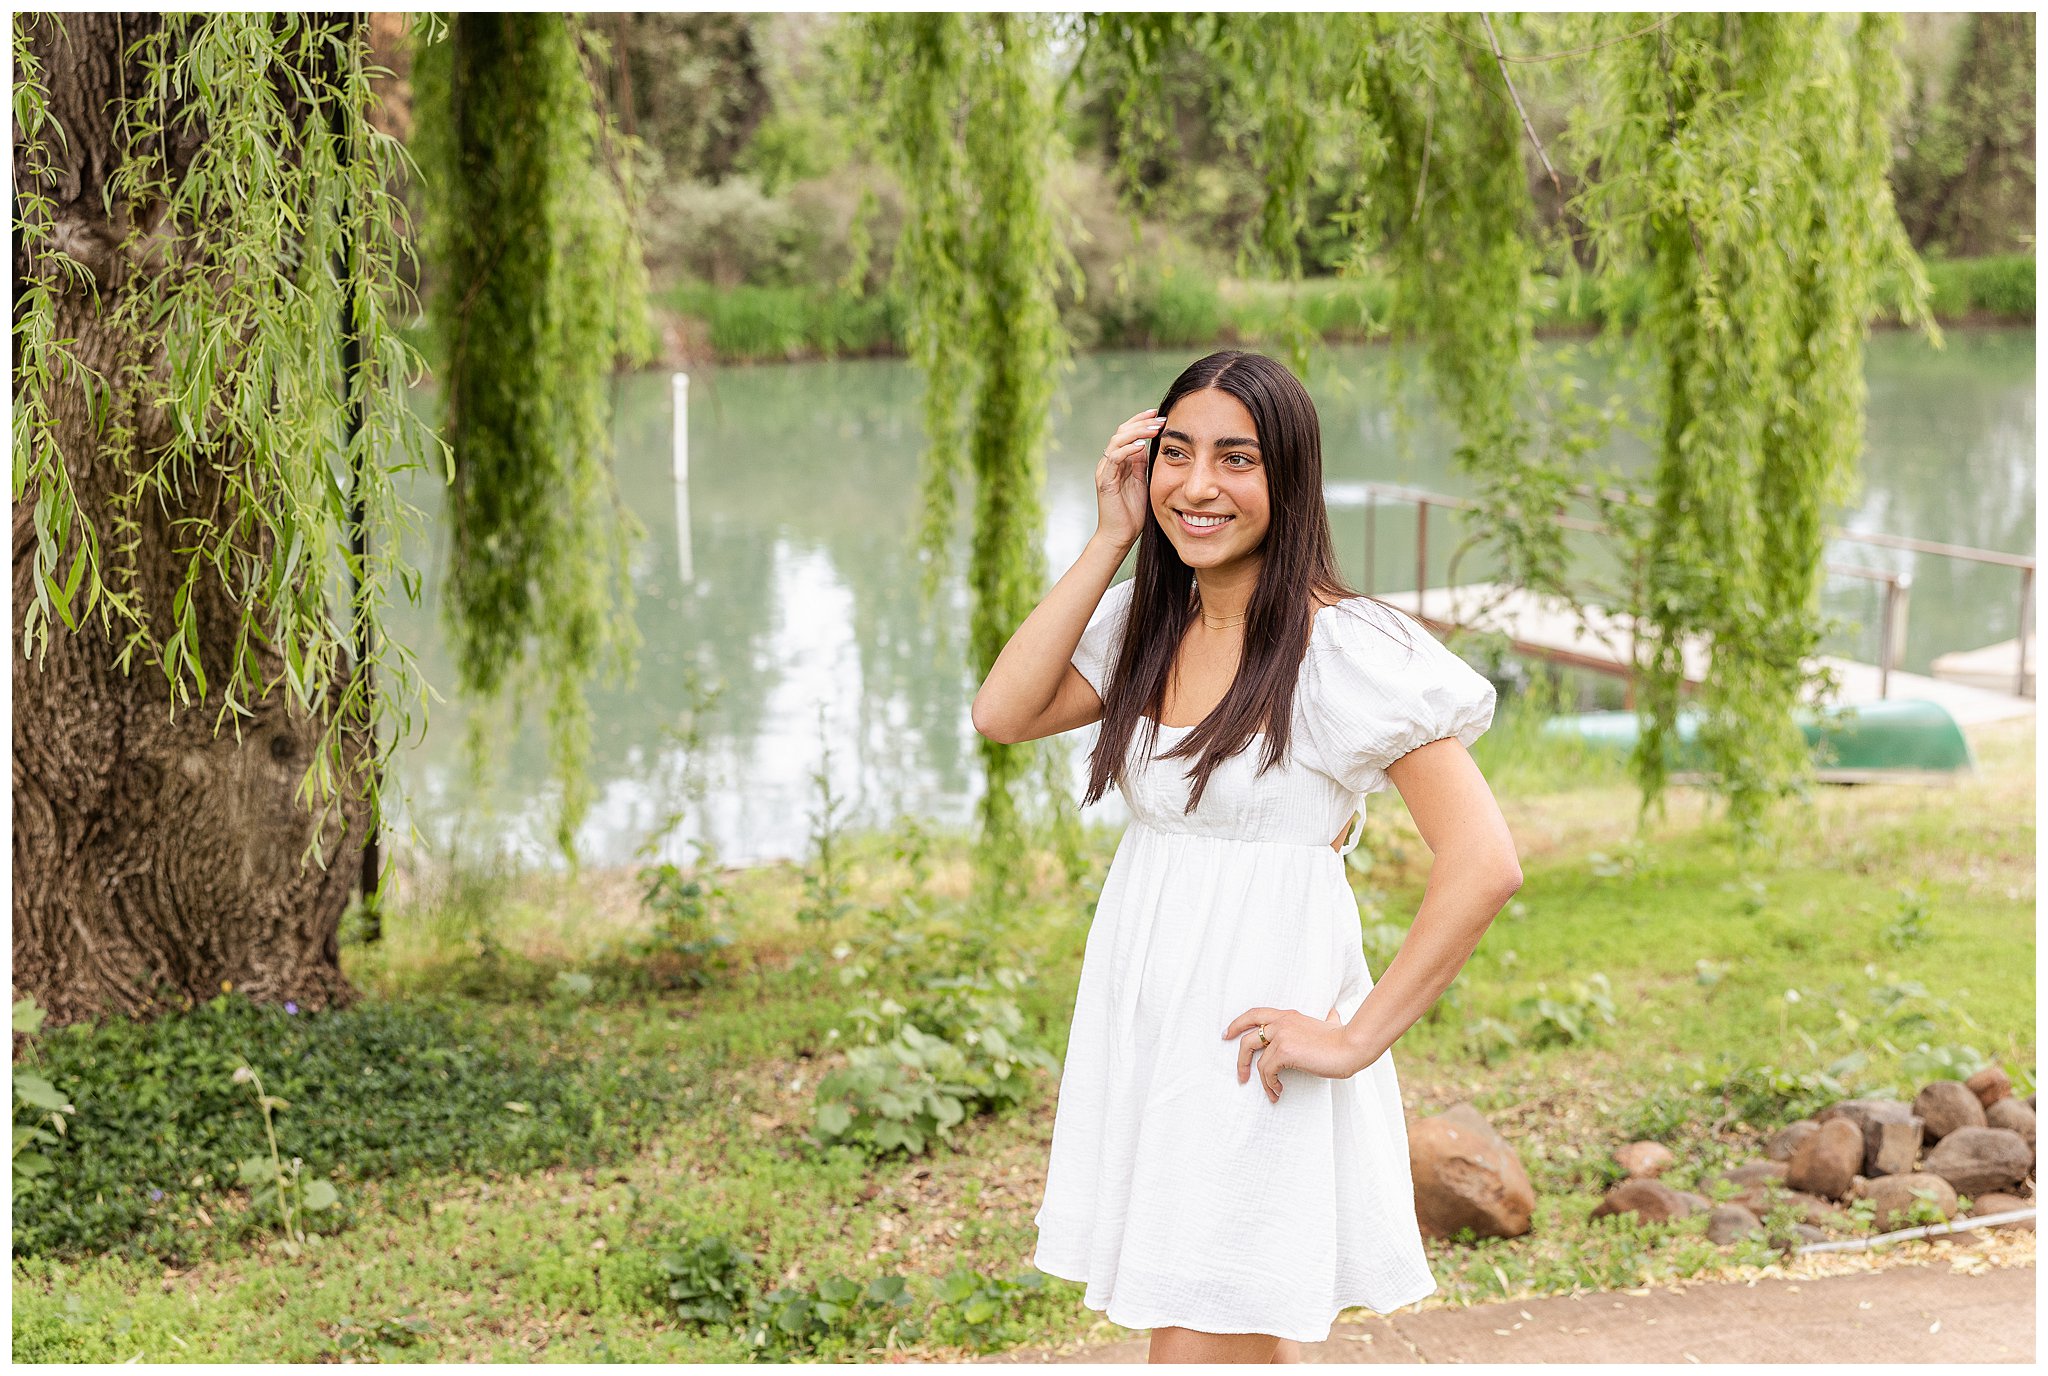 White Ranch Events Senior Girl Portriats Willow Tree Family Spring May Roses Pond,